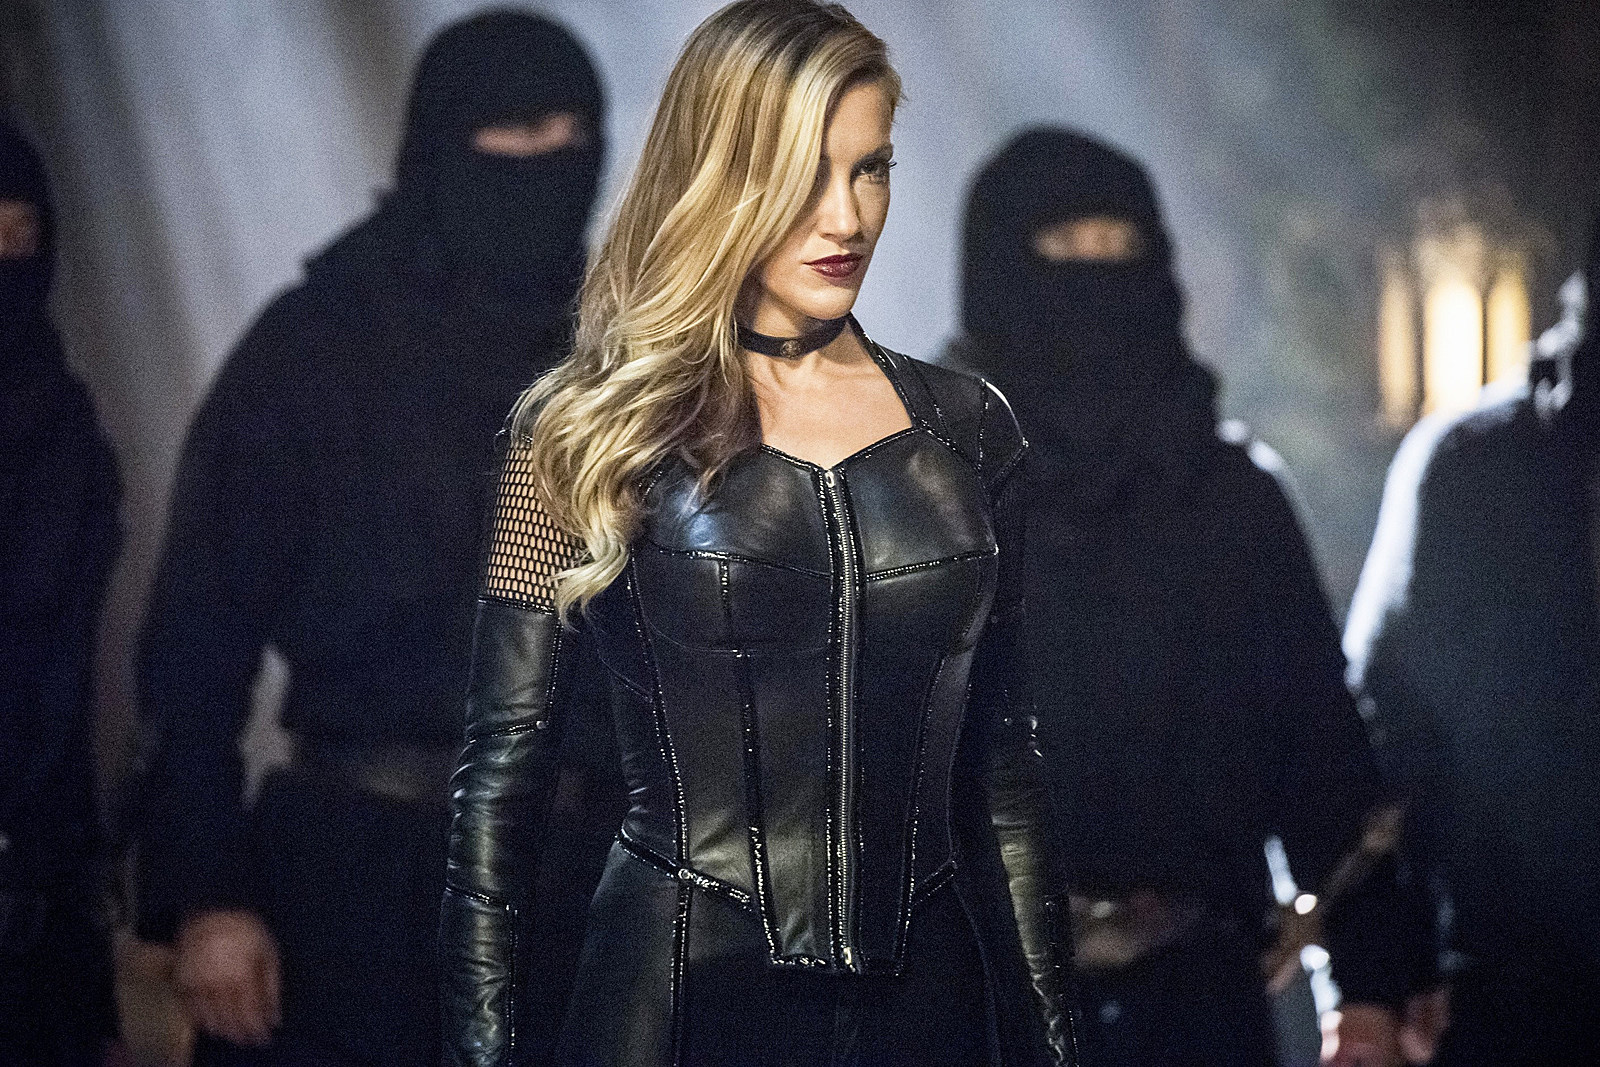 First Arrow Season 6 Production Art Pays Tribute To Black Canary 2836